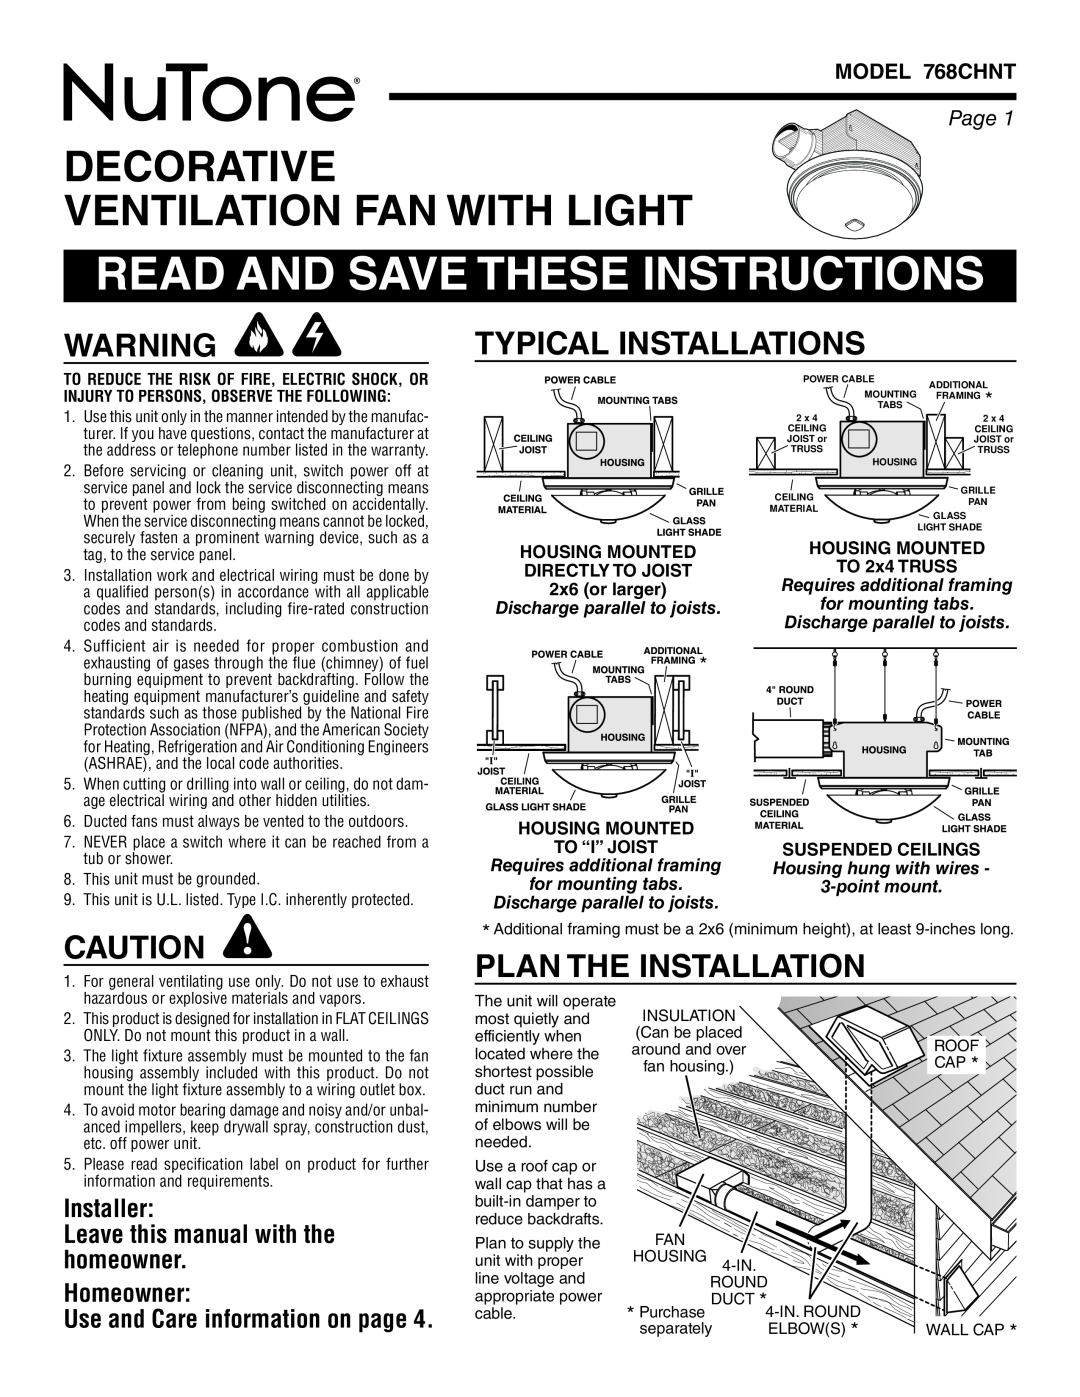 NuTone warranty Decorative Ventilation Fan With Light, Typical Installations, Plan The Installation, MODEL 768CHNT 